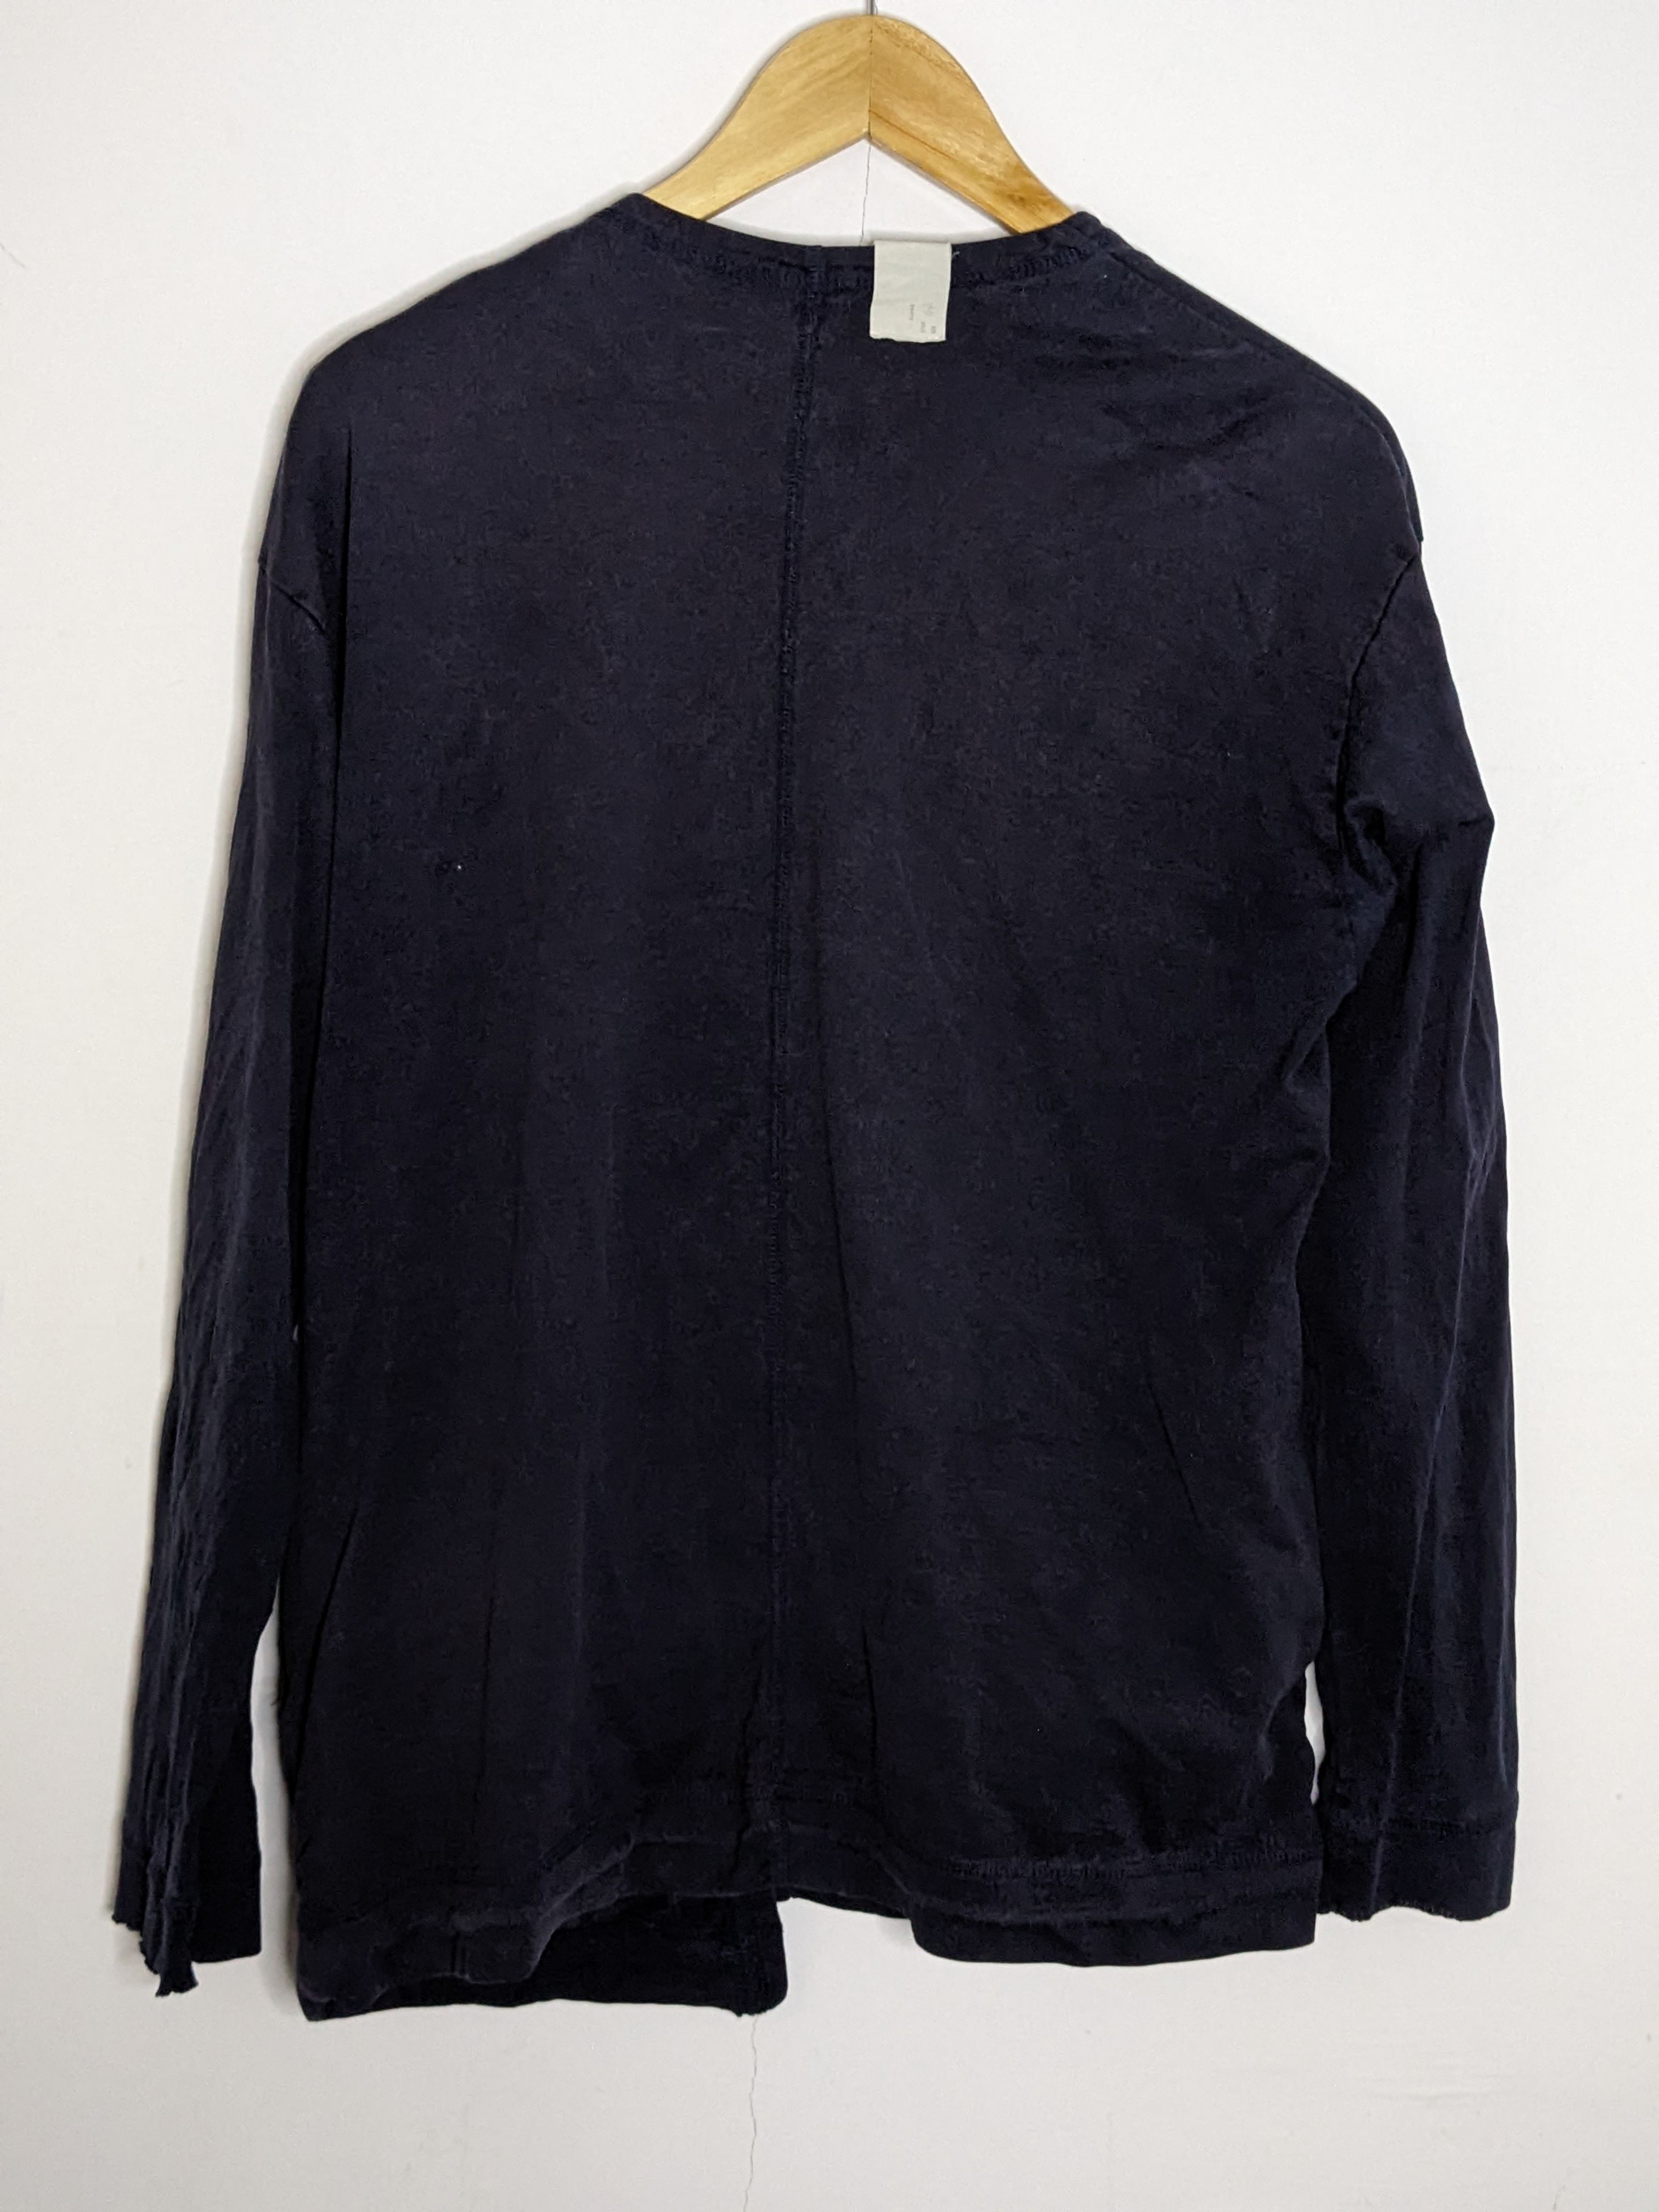 N. Hoolywood Sunfaded Cardigan Buttonless Navy Blue - 3